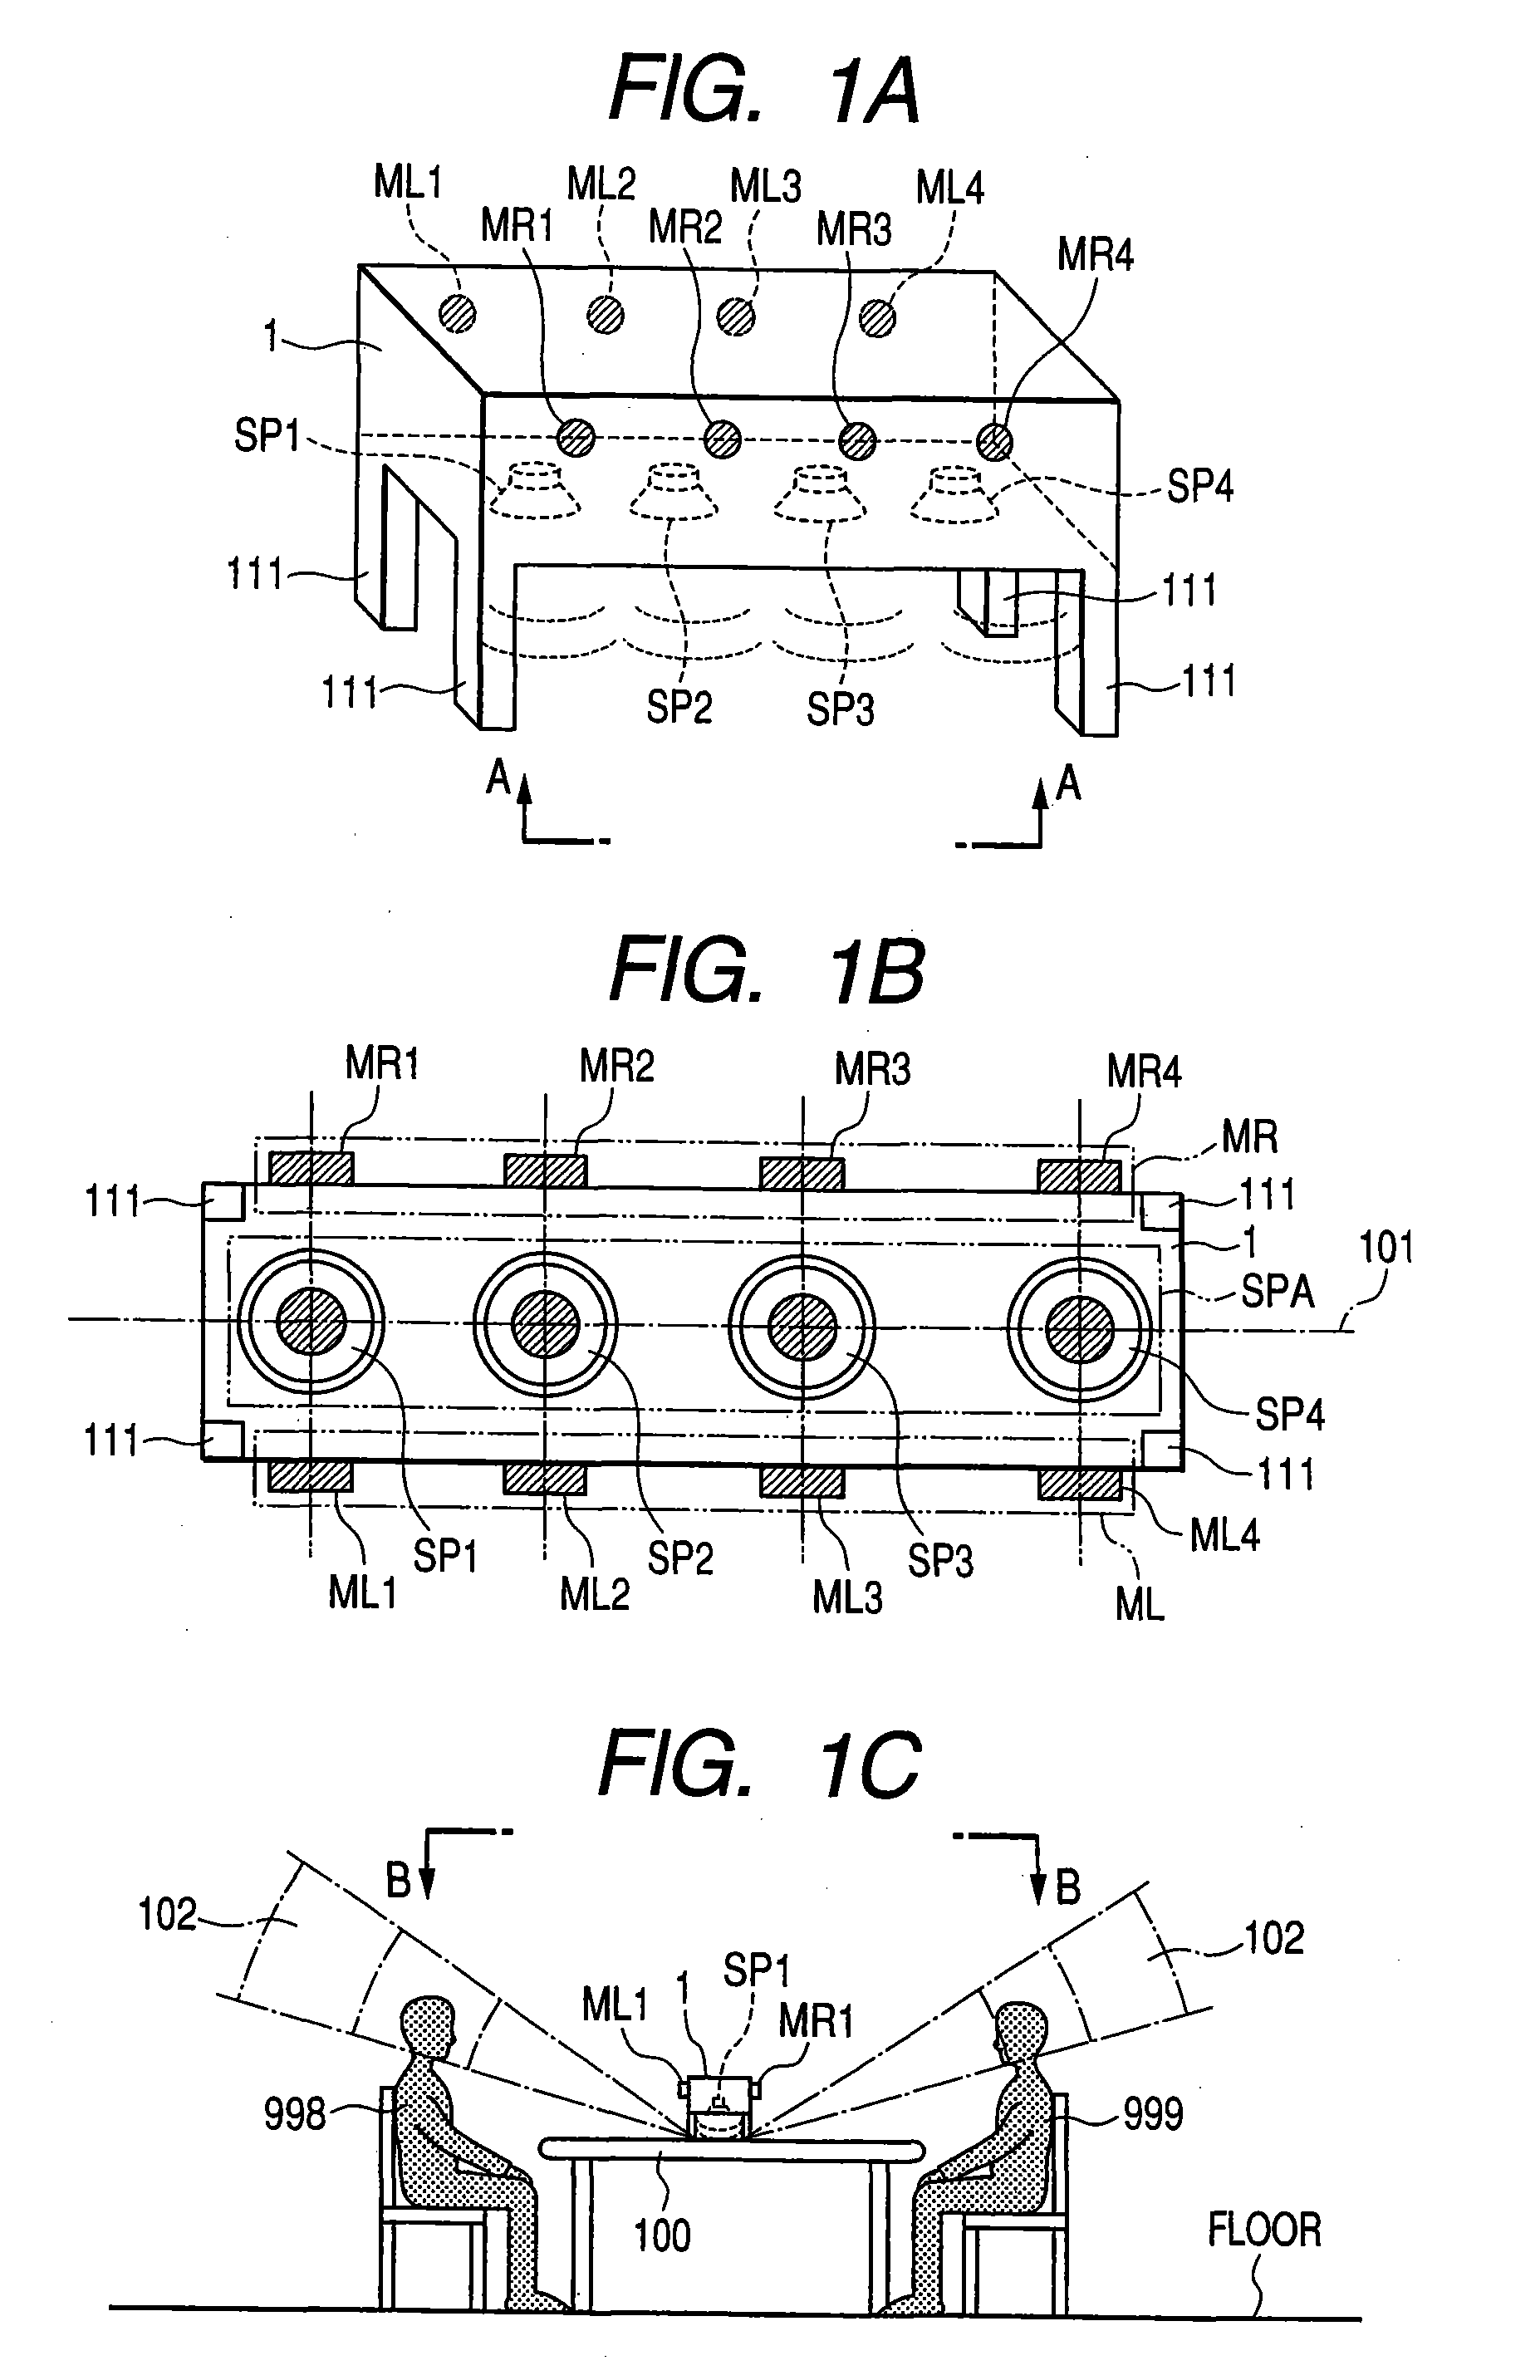 Remote conference apparatus and sound emitting/collecting apparatus